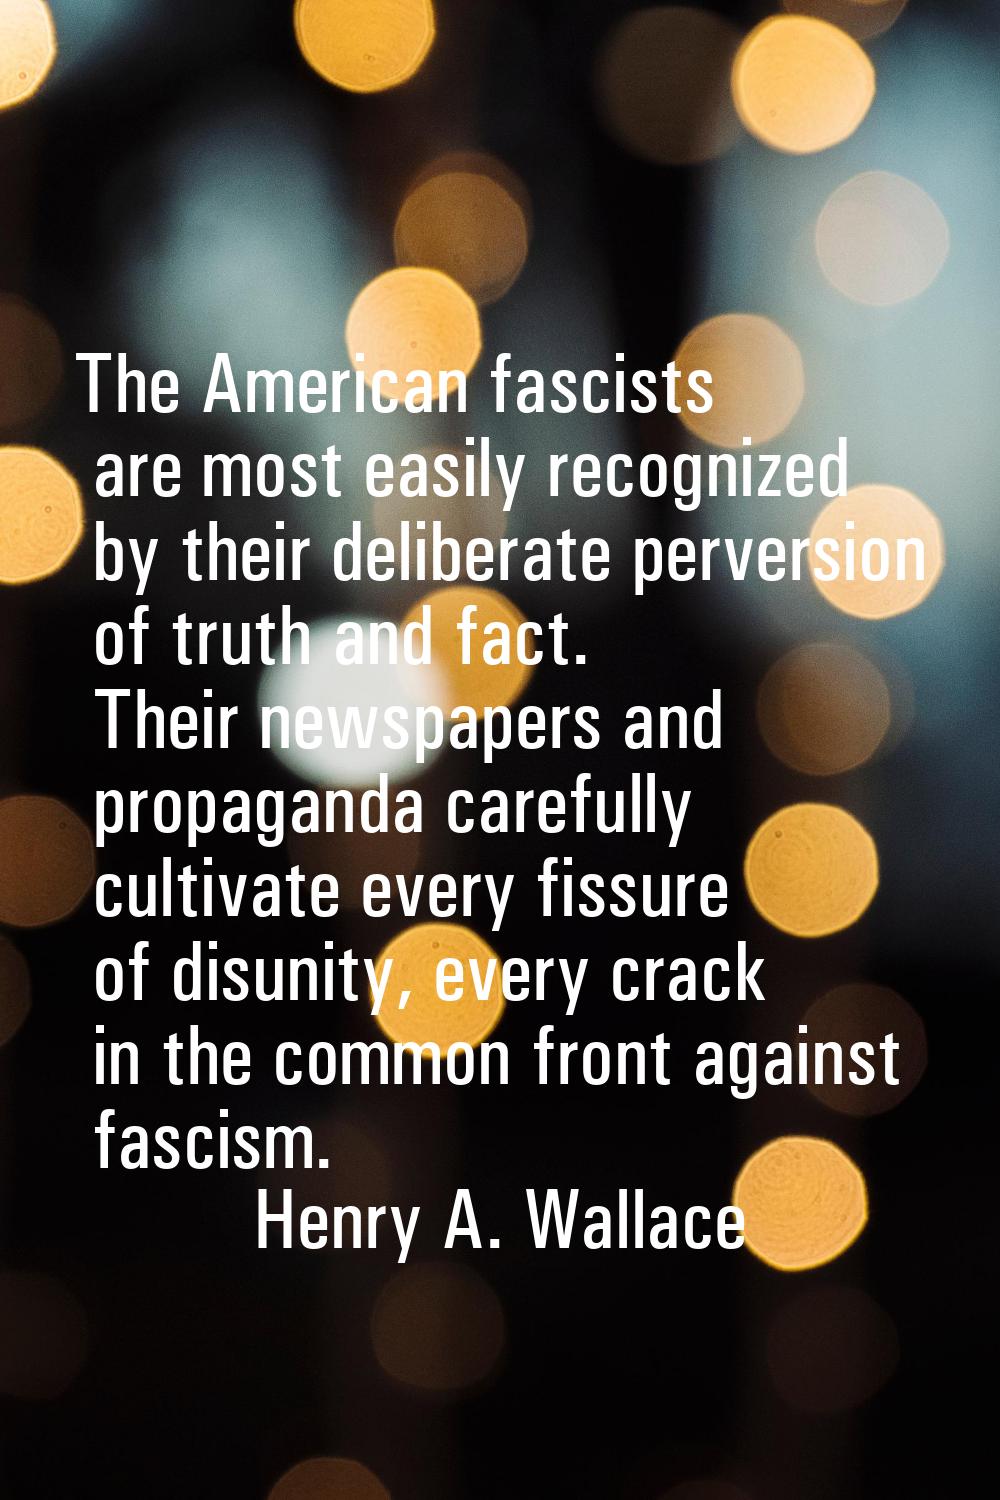 The American fascists are most easily recognized by their deliberate perversion of truth and fact. 